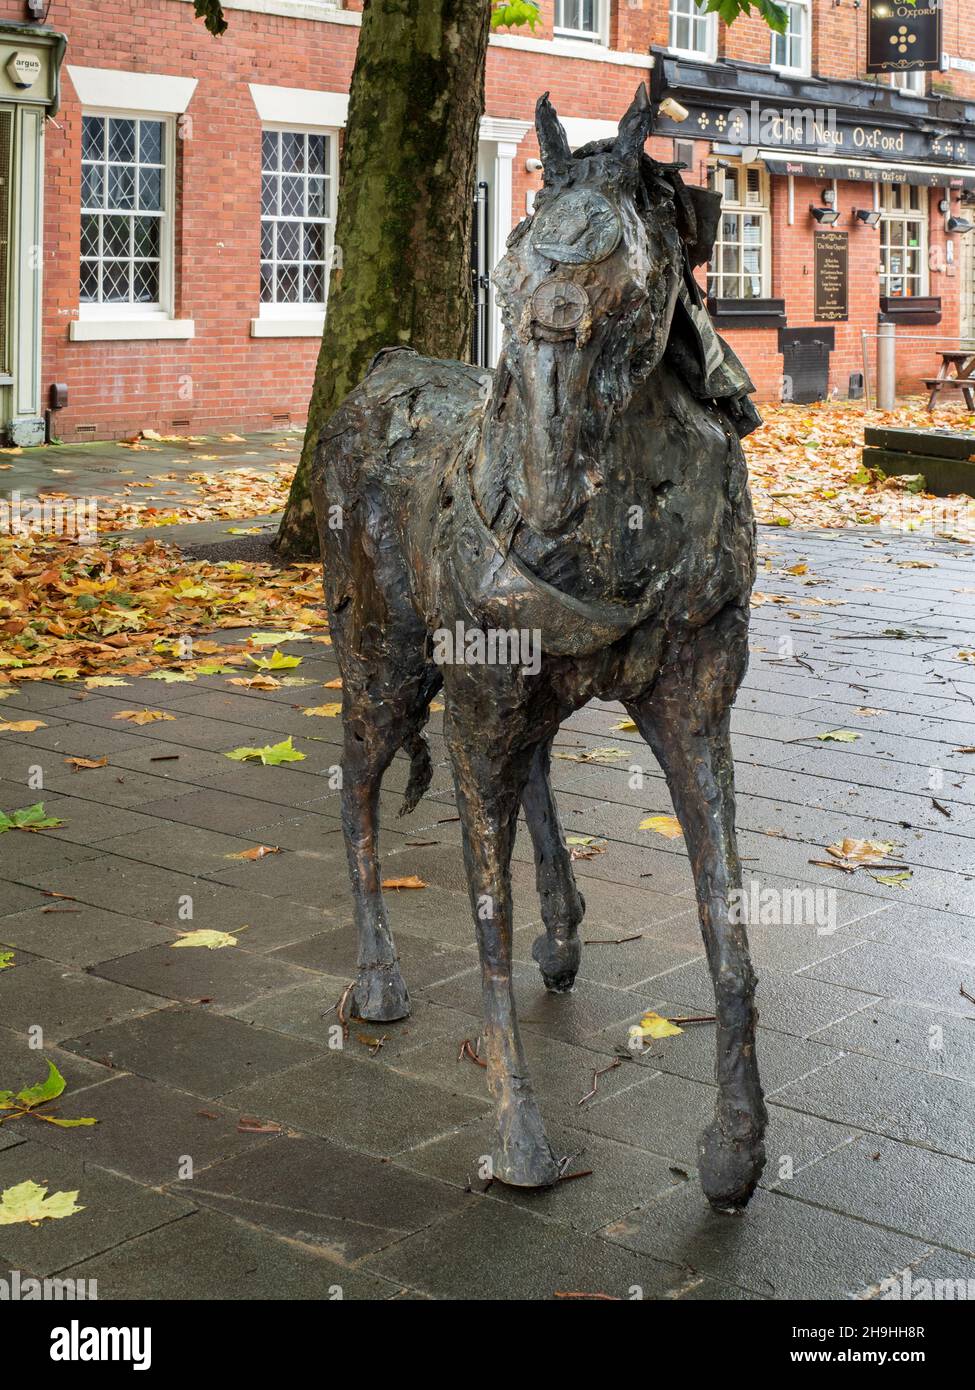 Bronze horse sculpture by Emma Rodgers depicting Salfords pioneering history in Bexley Square Salford Greater Manchester England Stock Photo